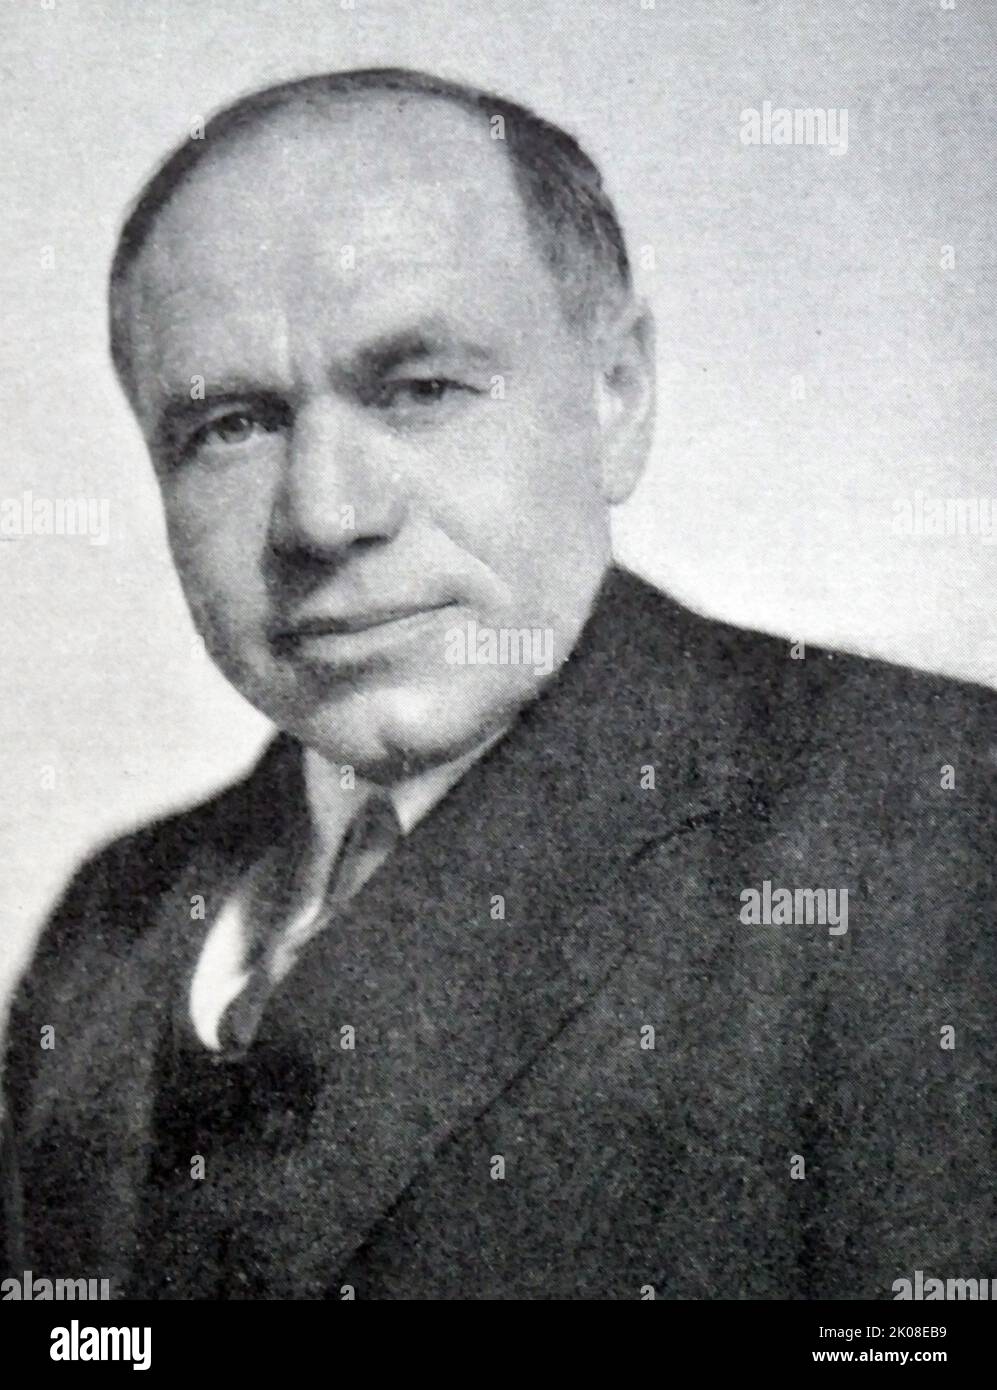 William Maxwell Aitken, 1st Baron Beaverbrook, PC, ONB (25 May 1879 - 9 June 1964), generally known as Lord Beaverbrook, was a Canadian-British newspaper publisher and backstage politician who was an influential figure in British media and politics of the first half of the 20th century Stock Photo